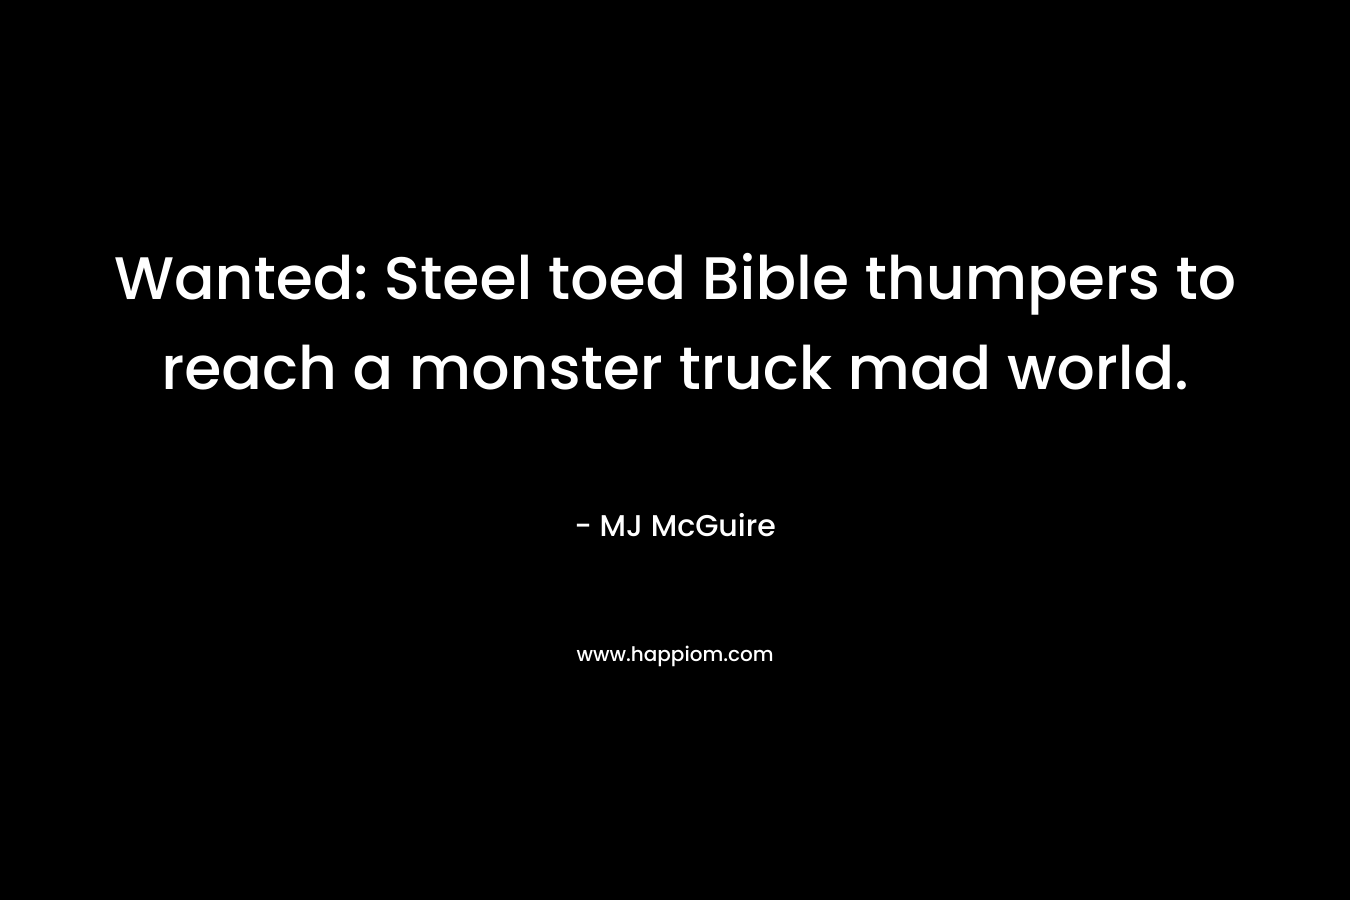 Wanted: Steel toed Bible thumpers to reach a monster truck mad world.